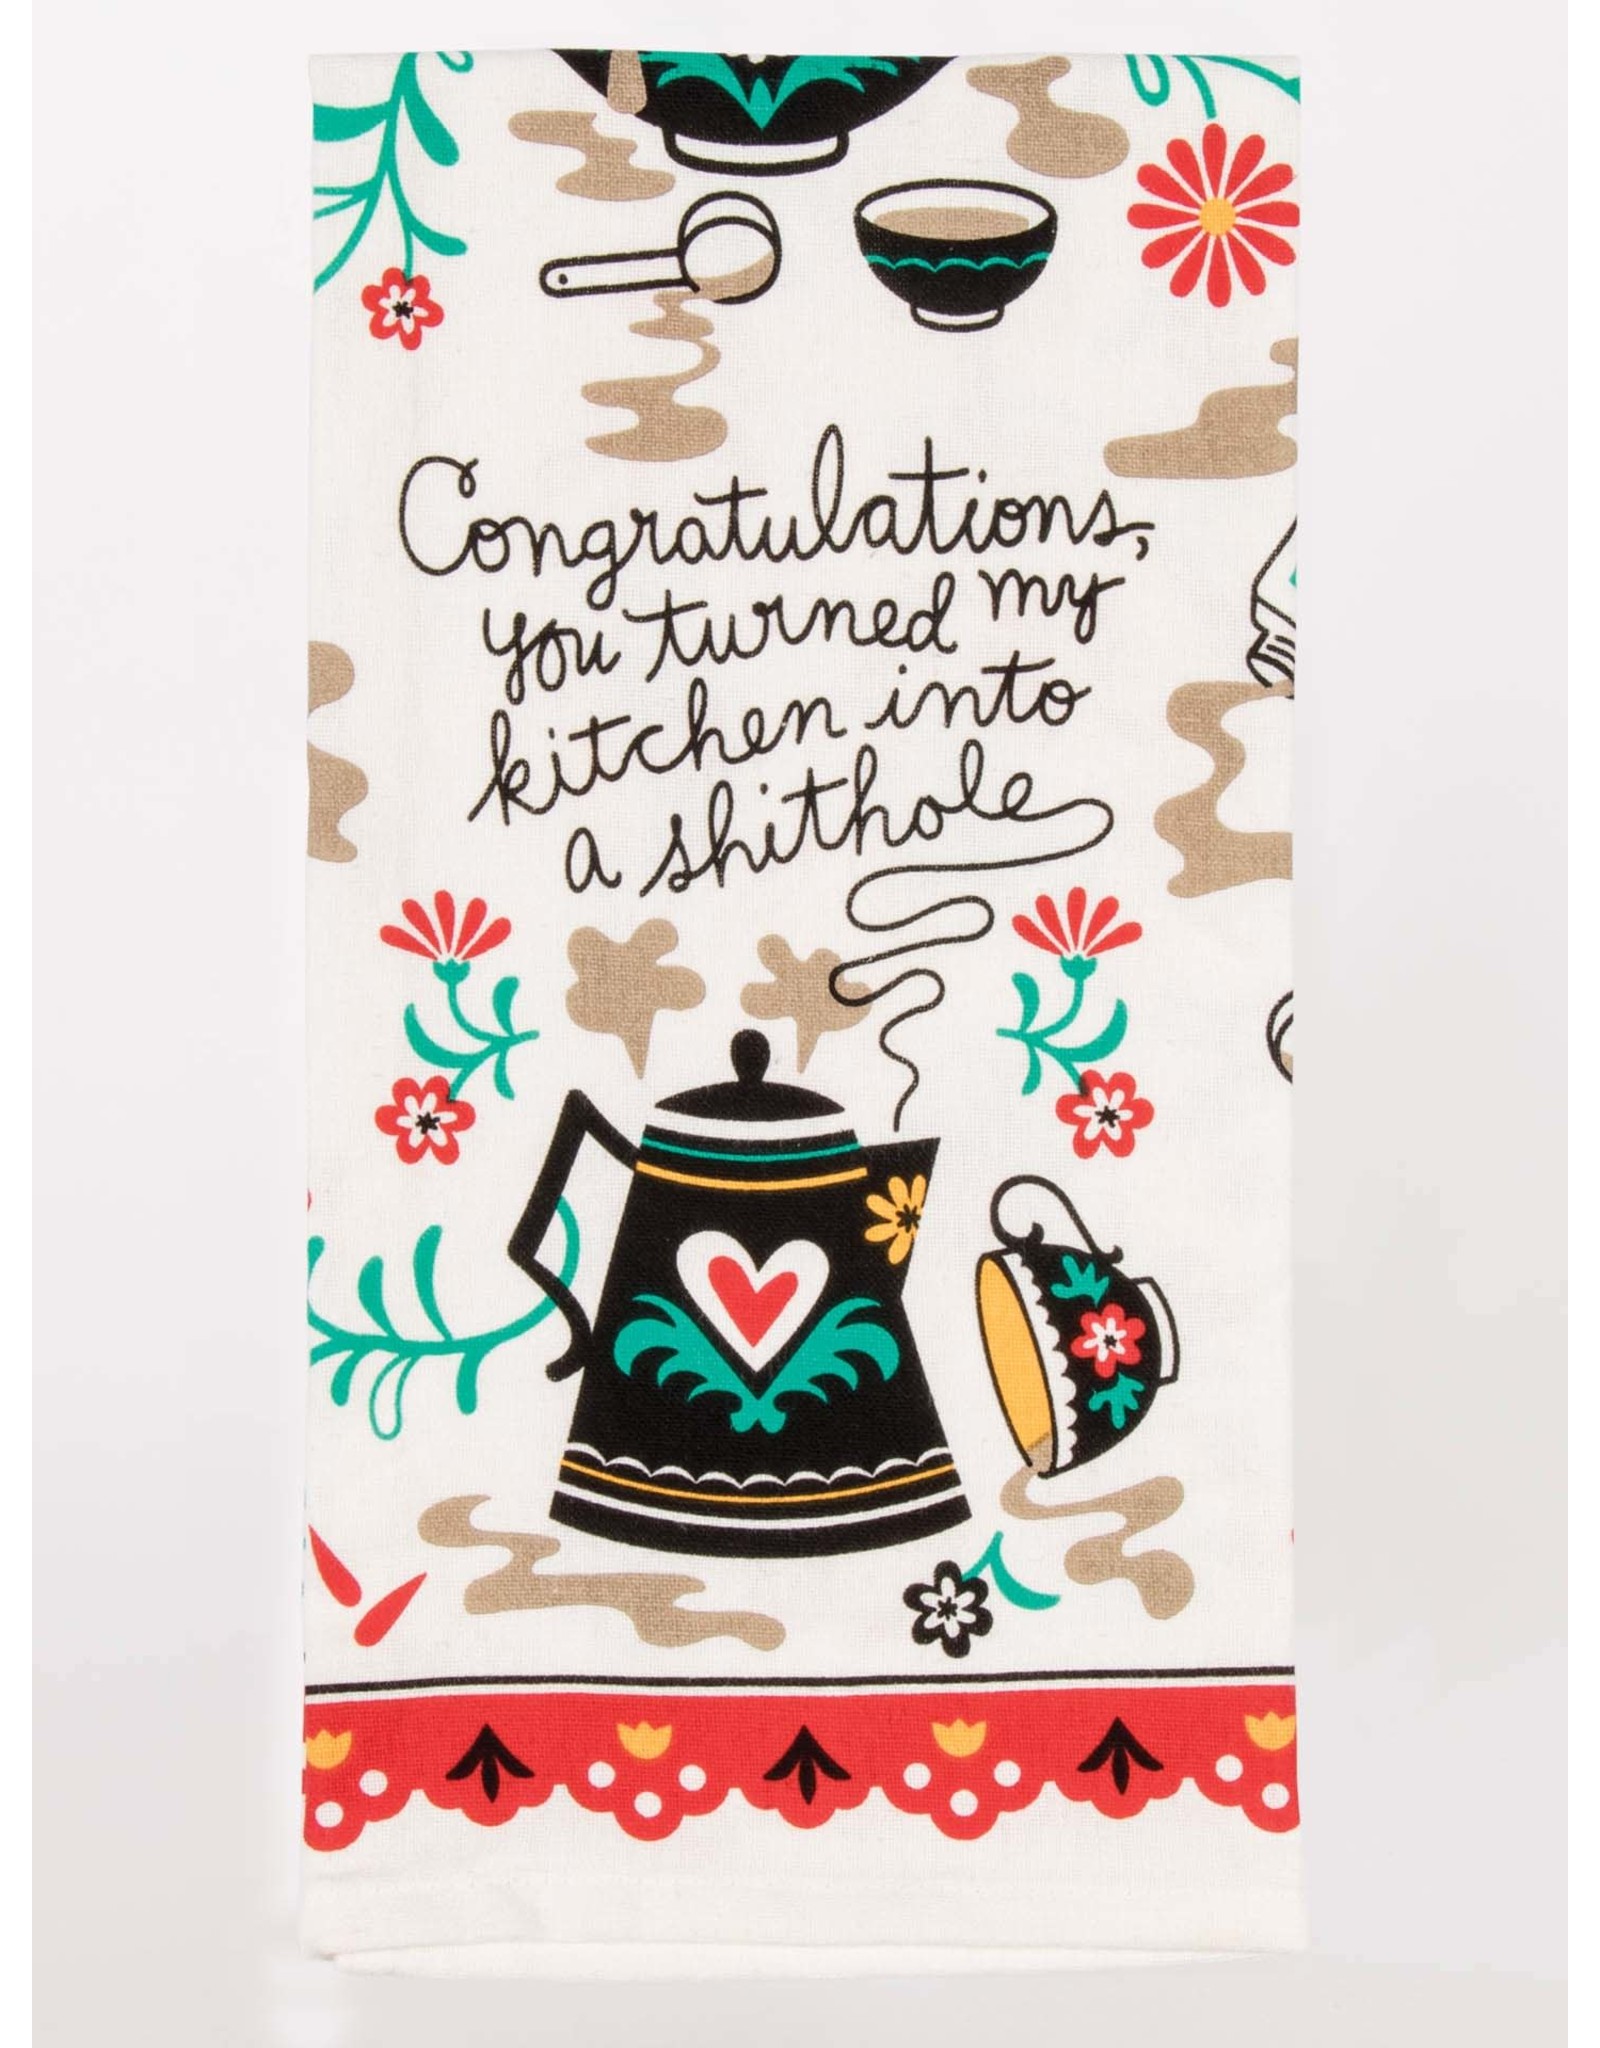 Biscuit General Store Blue Q - Dish Towel / Congratulations, Kitchen Into a Shithole